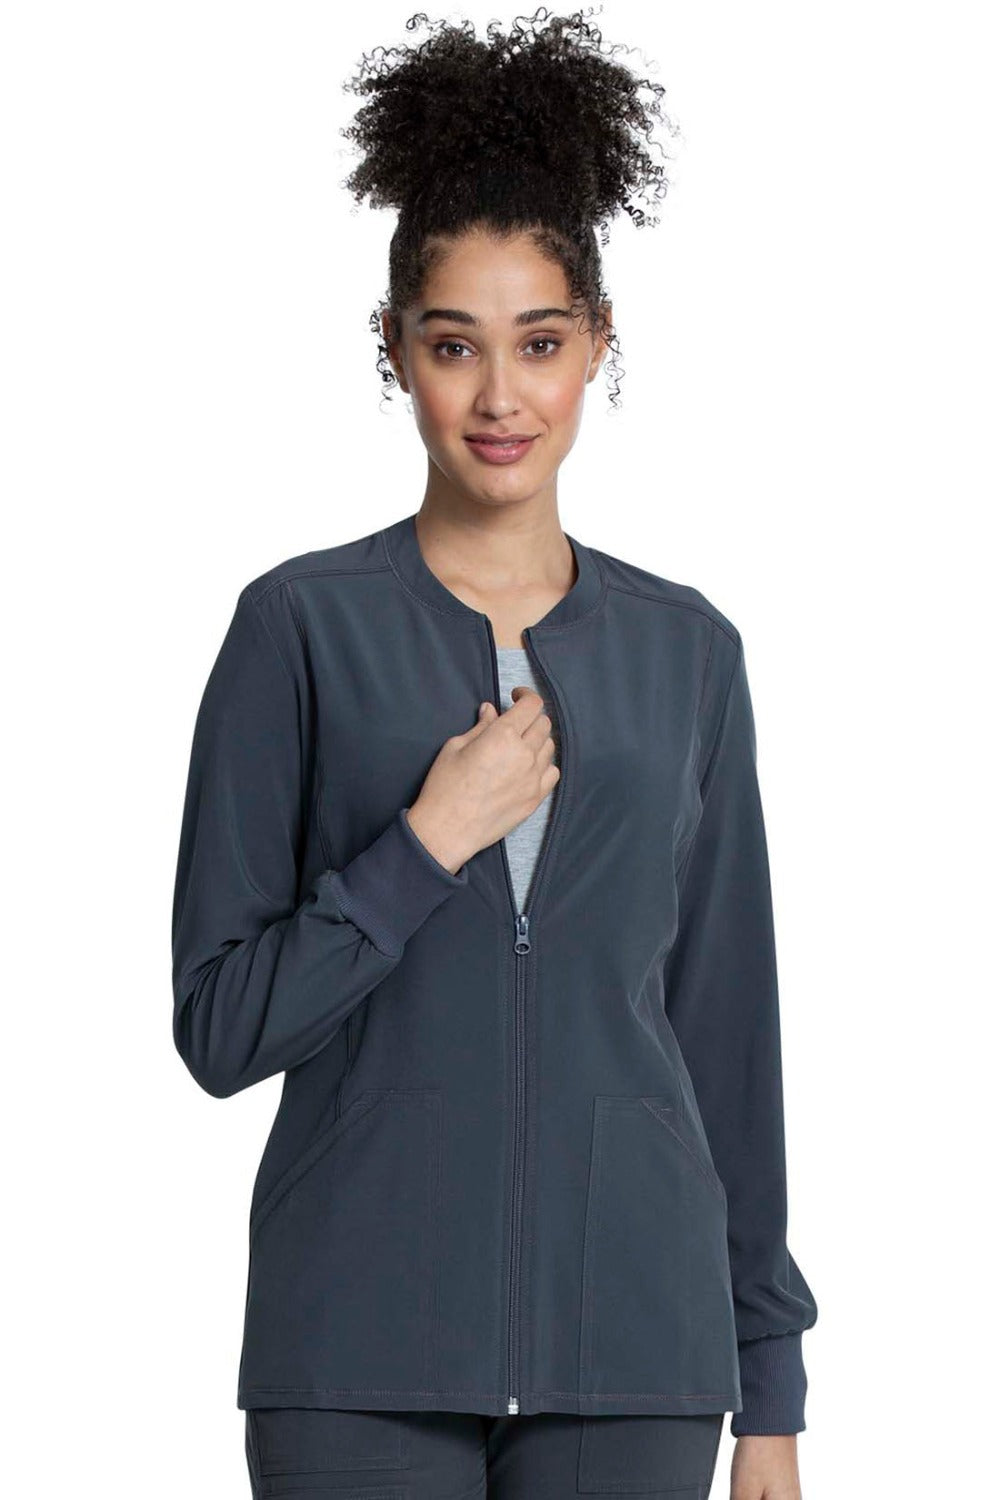 Cherokee Allura Round Neck Zipper Jacket in Pewter at Parker's Clothing and Shoes.